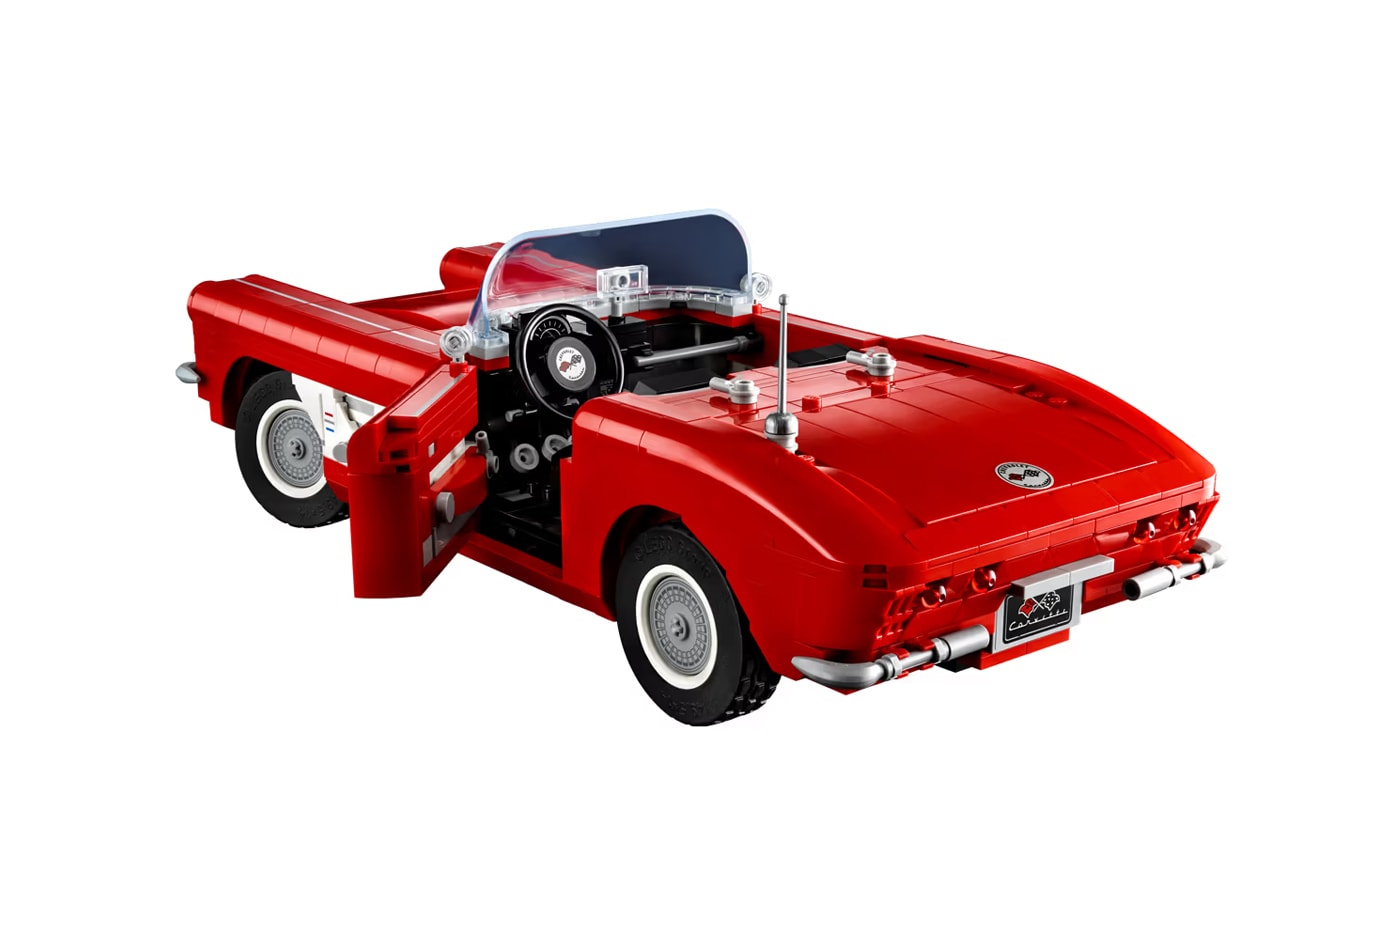 LEGO Icons 1961 Chevrolet Corvette 10321 Release Date info store list buying guide photos price early vip access chevy 70th anniversary